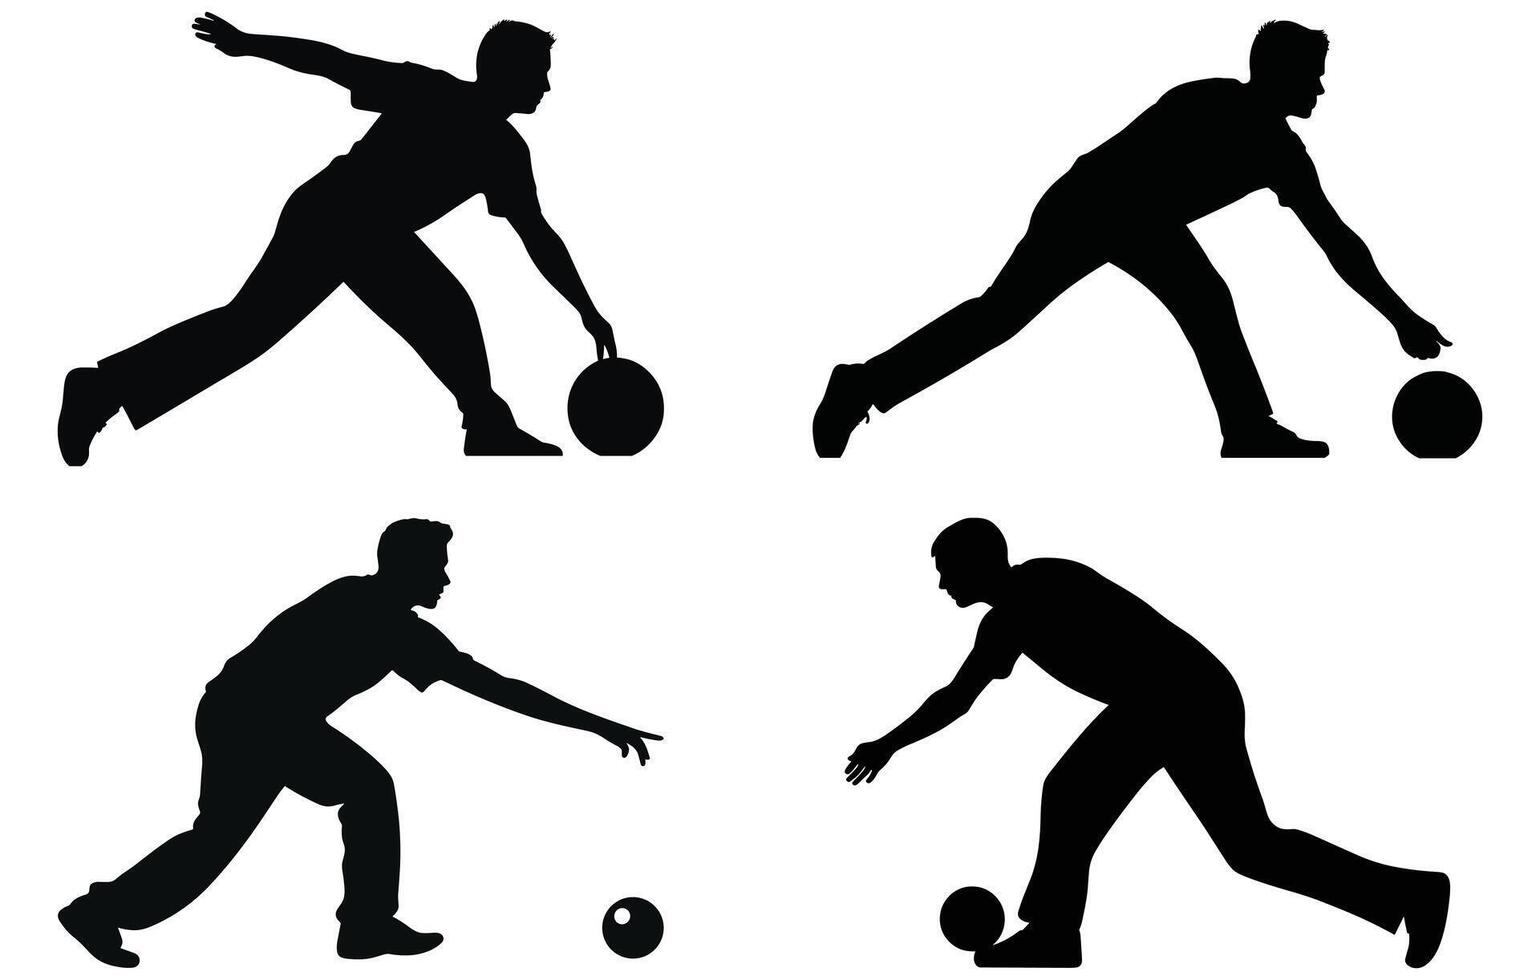 bowler silhouette collection set,bowling silhouettes,Multiple silhouettes of men bowling vector